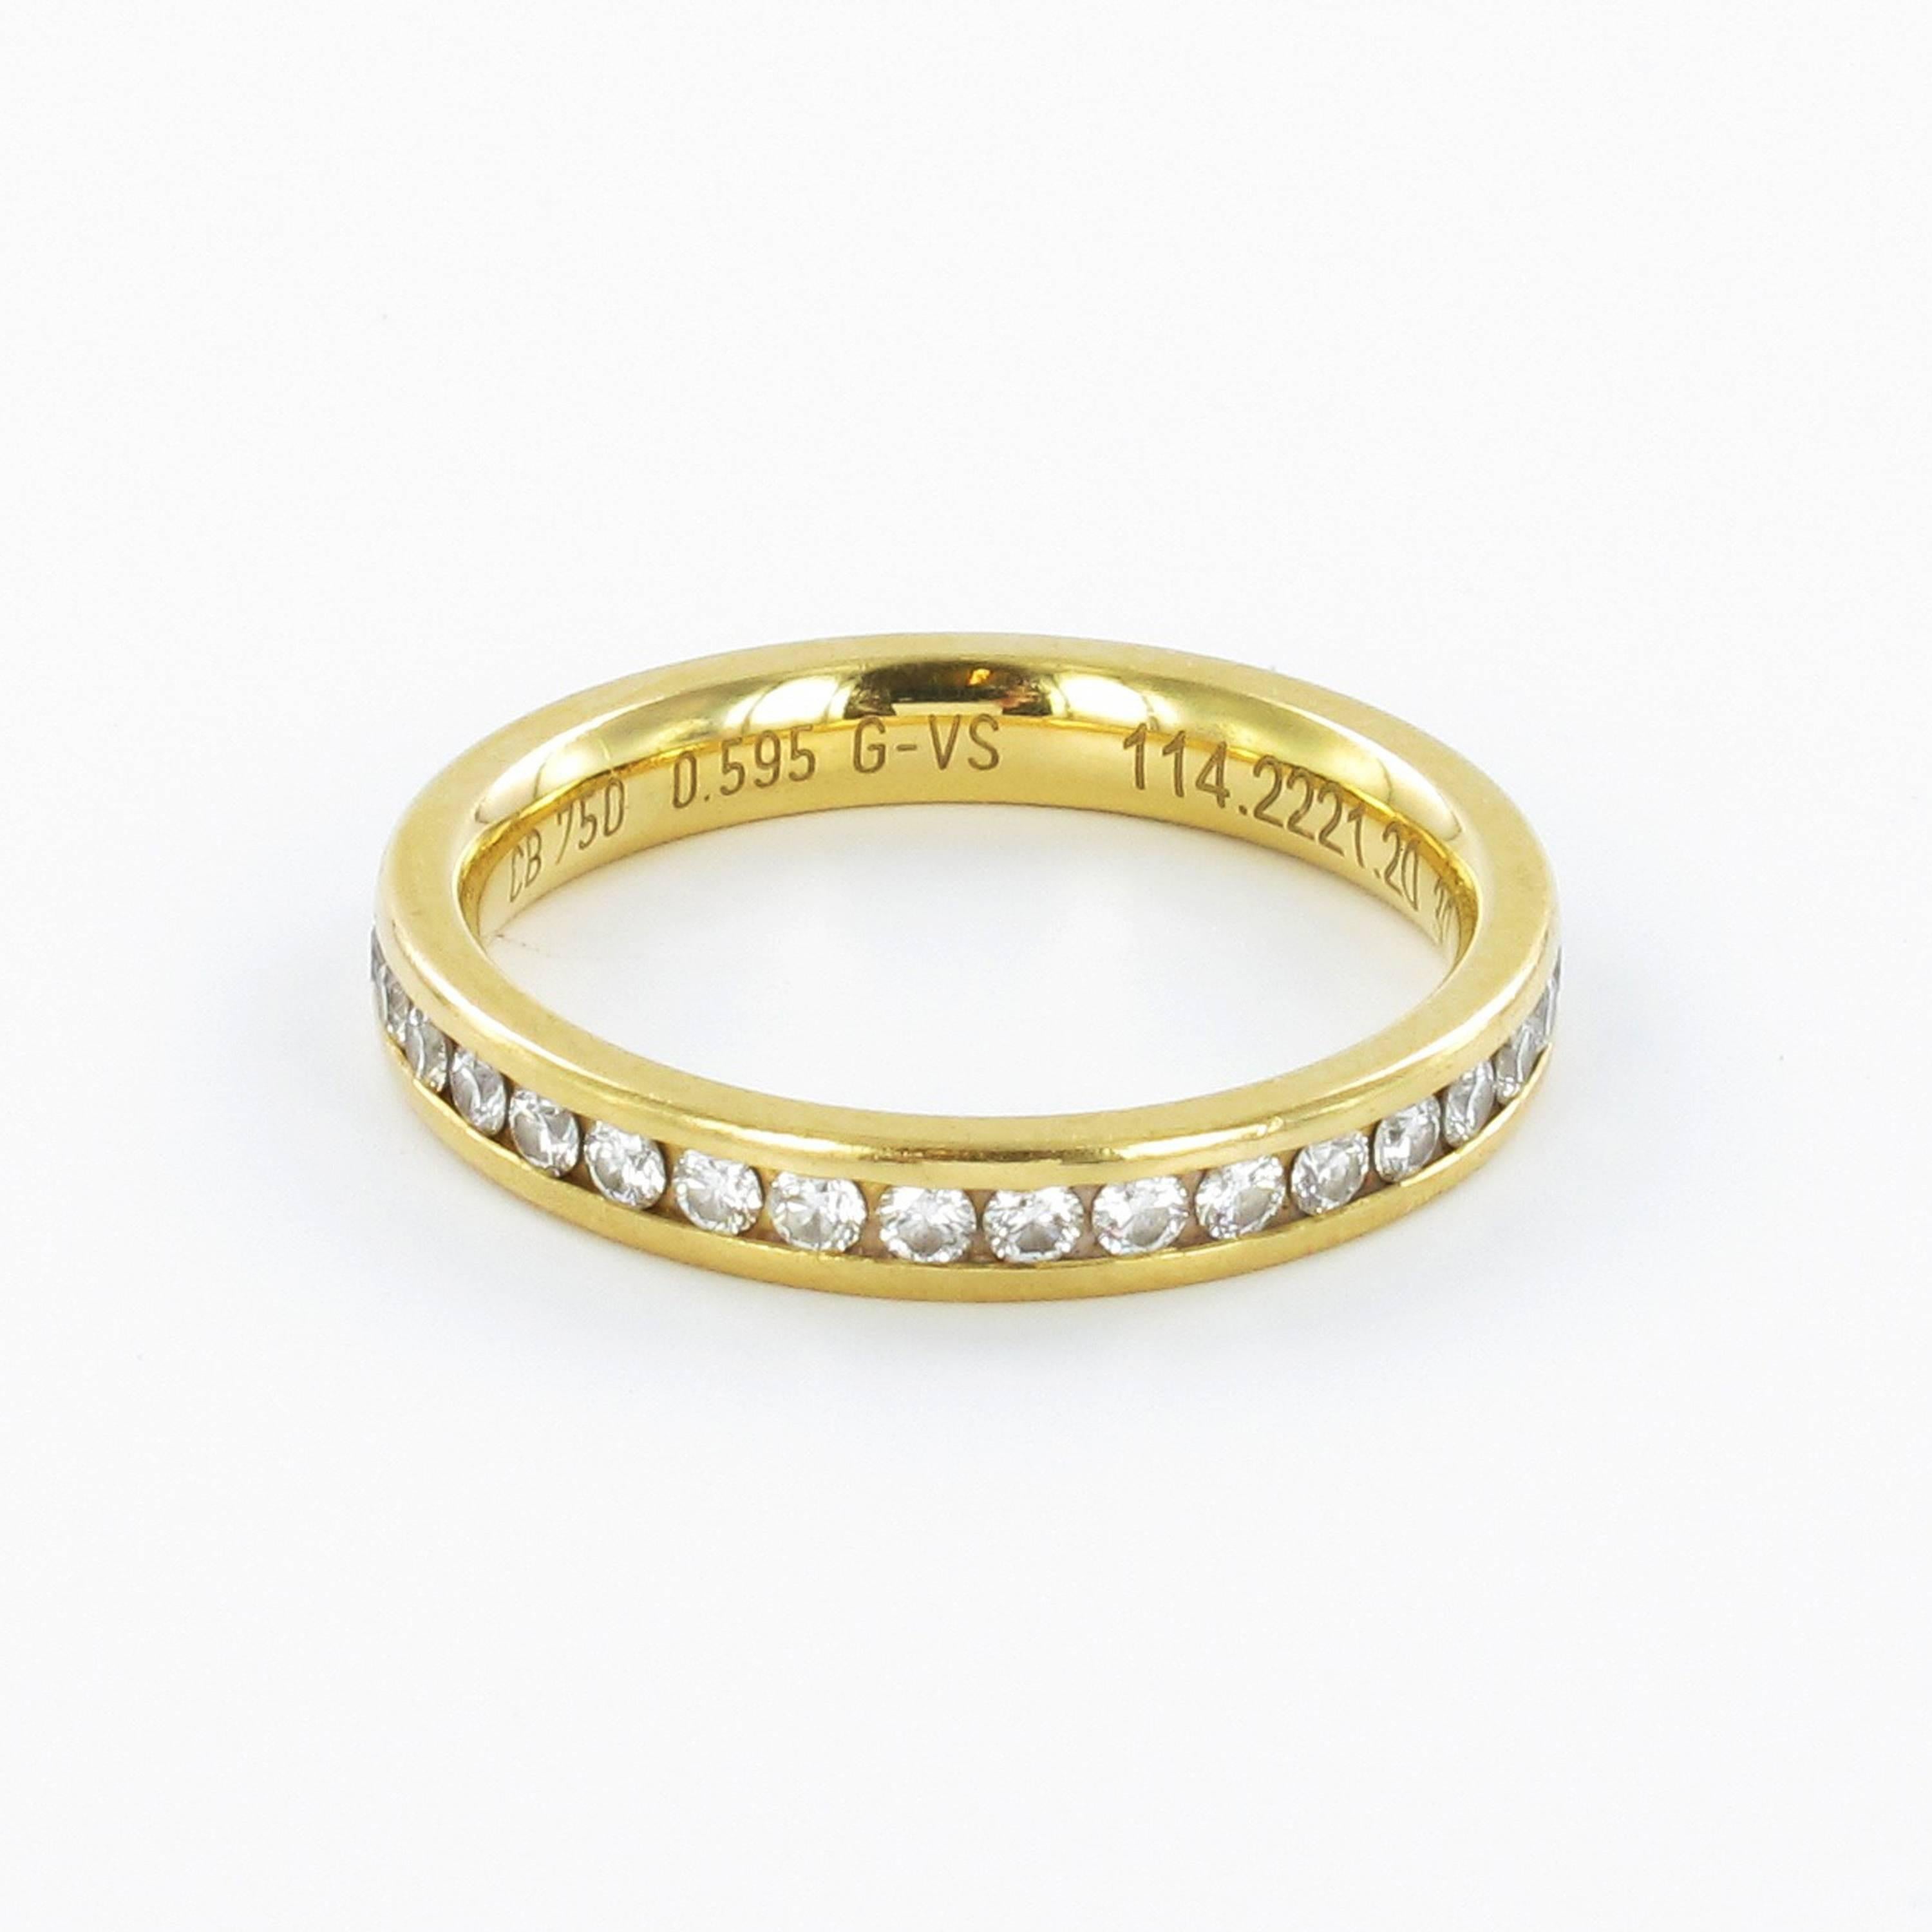 Diamond eternity band in 18 karat yellow gold. Channel set with 35 brilliant cut diamonds with G colour and vs clarity. Total weight 0.59 carats. Size 52, US 6-1/4

Stock number: 1000185228